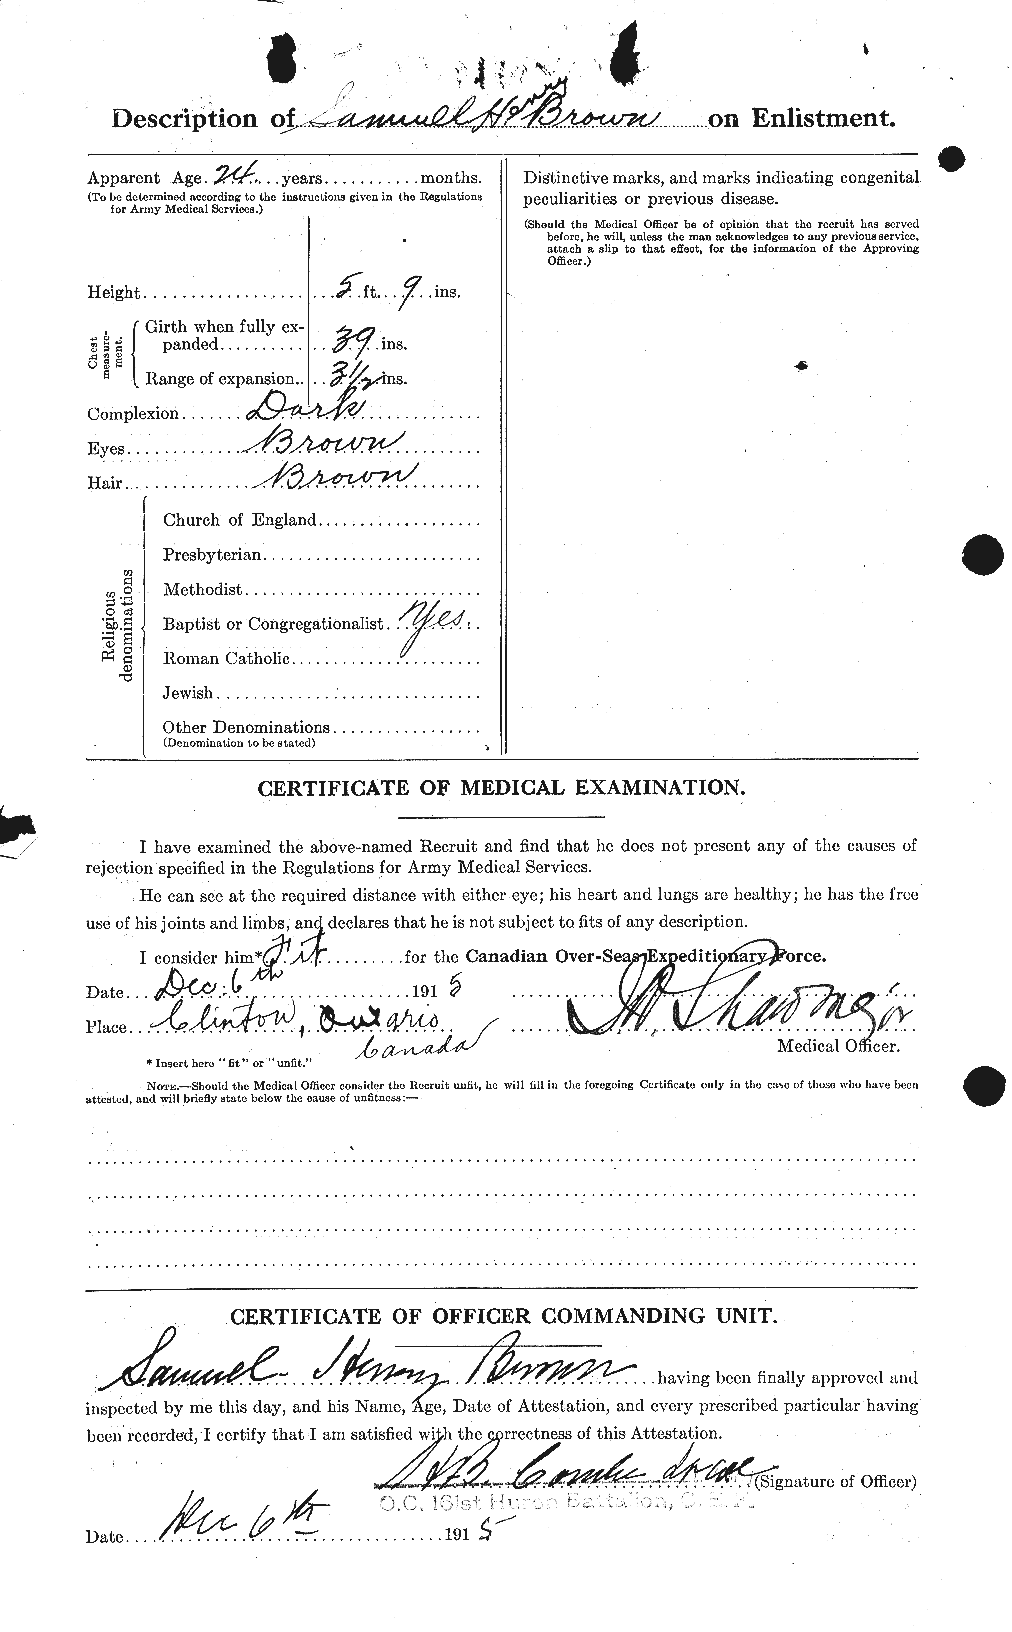 Personnel Records of the First World War - CEF 266393b